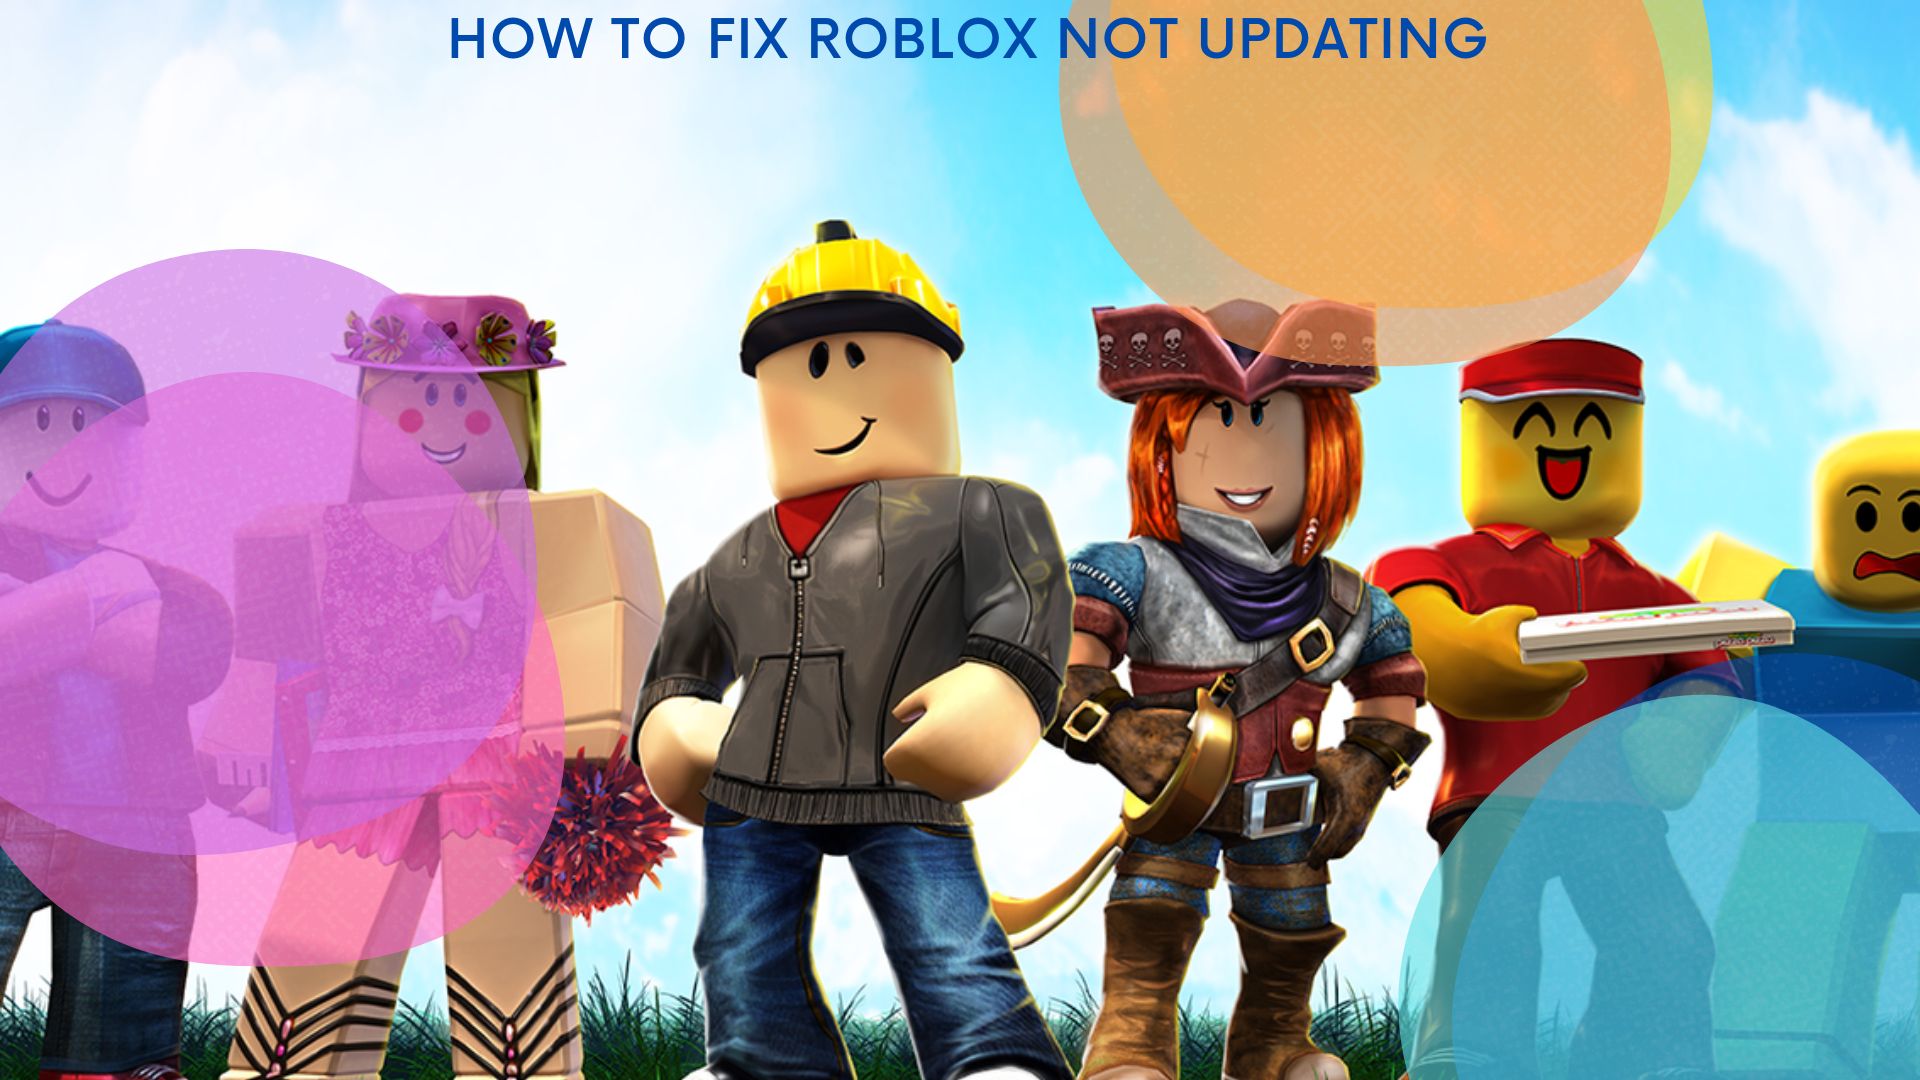 How To Fix Roblox Not Updating